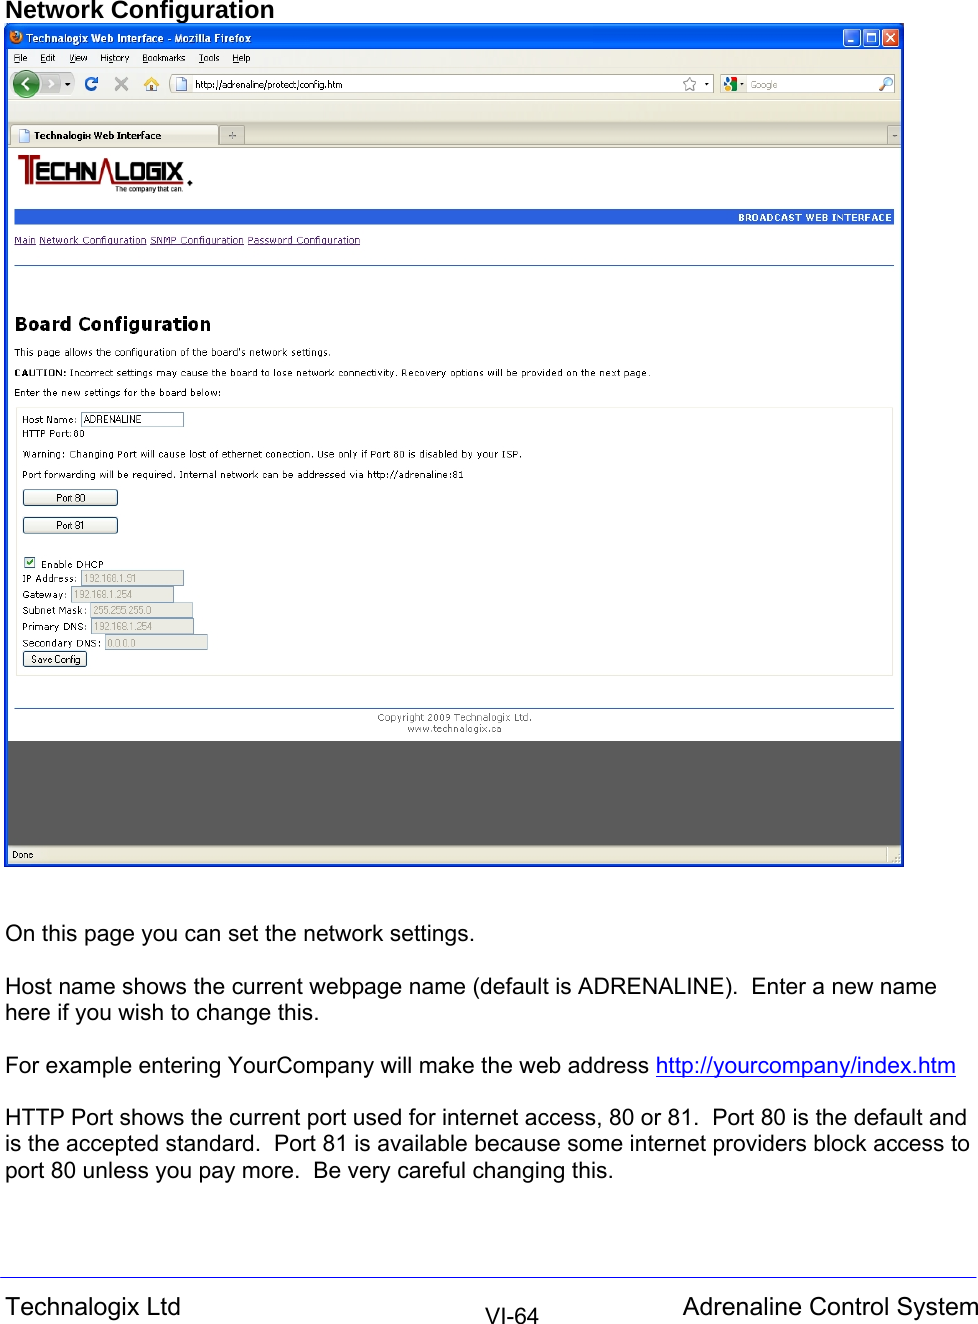  Technalogix Ltd  Adrenaline Control System  VI-64Network Configuration    On this page you can set the network settings.  Host name shows the current webpage name (default is ADRENALINE).  Enter a new name here if you wish to change this.    For example entering YourCompany will make the web address http://yourcompany/index.htm  HTTP Port shows the current port used for internet access, 80 or 81.  Port 80 is the default and is the accepted standard.  Port 81 is available because some internet providers block access to port 80 unless you pay more.  Be very careful changing this.  